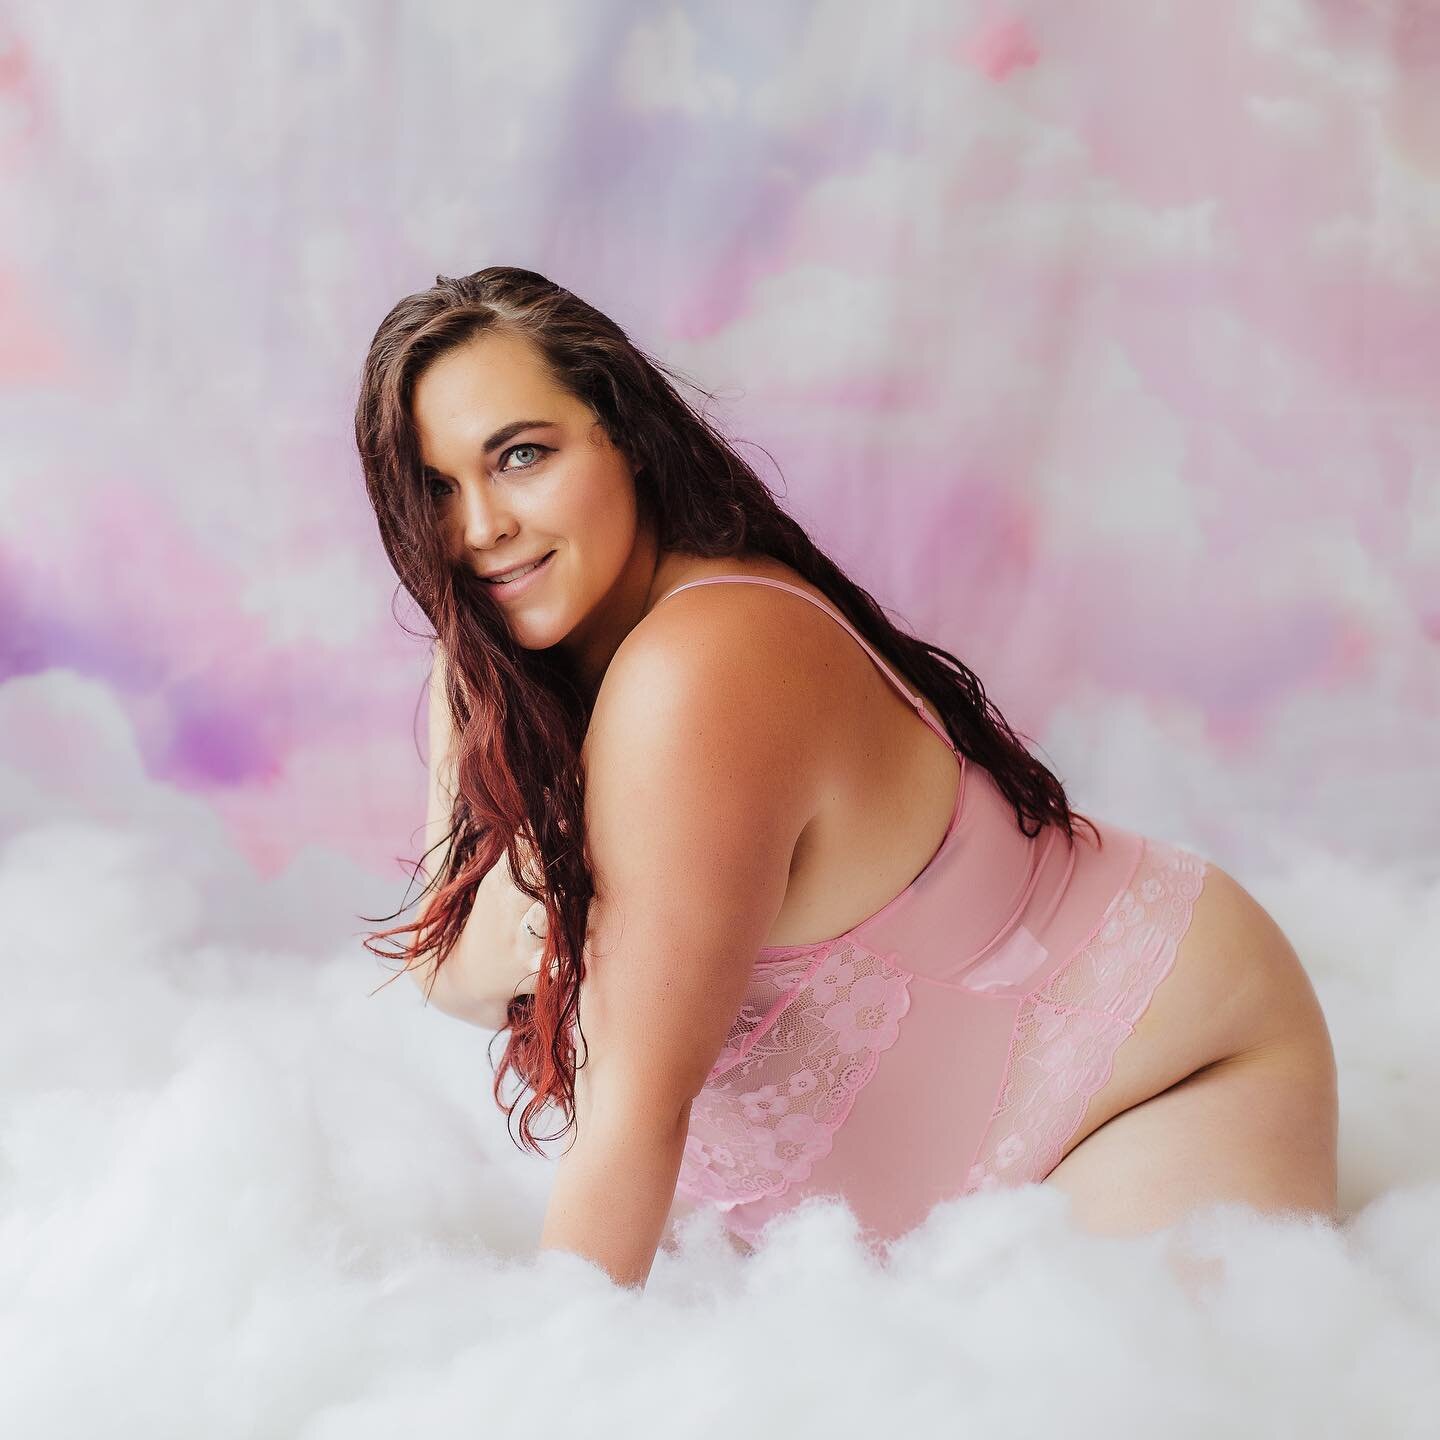 I finally got to try out my new set in the studio and I&rsquo;m in L❤️VE! Want your own session in the clouds? I can help! 

#Oregonboudoir #oregonboudoirphotography #oregonboudiorphotographer #oregonphotographer #oregonphotography #salemoregon #down